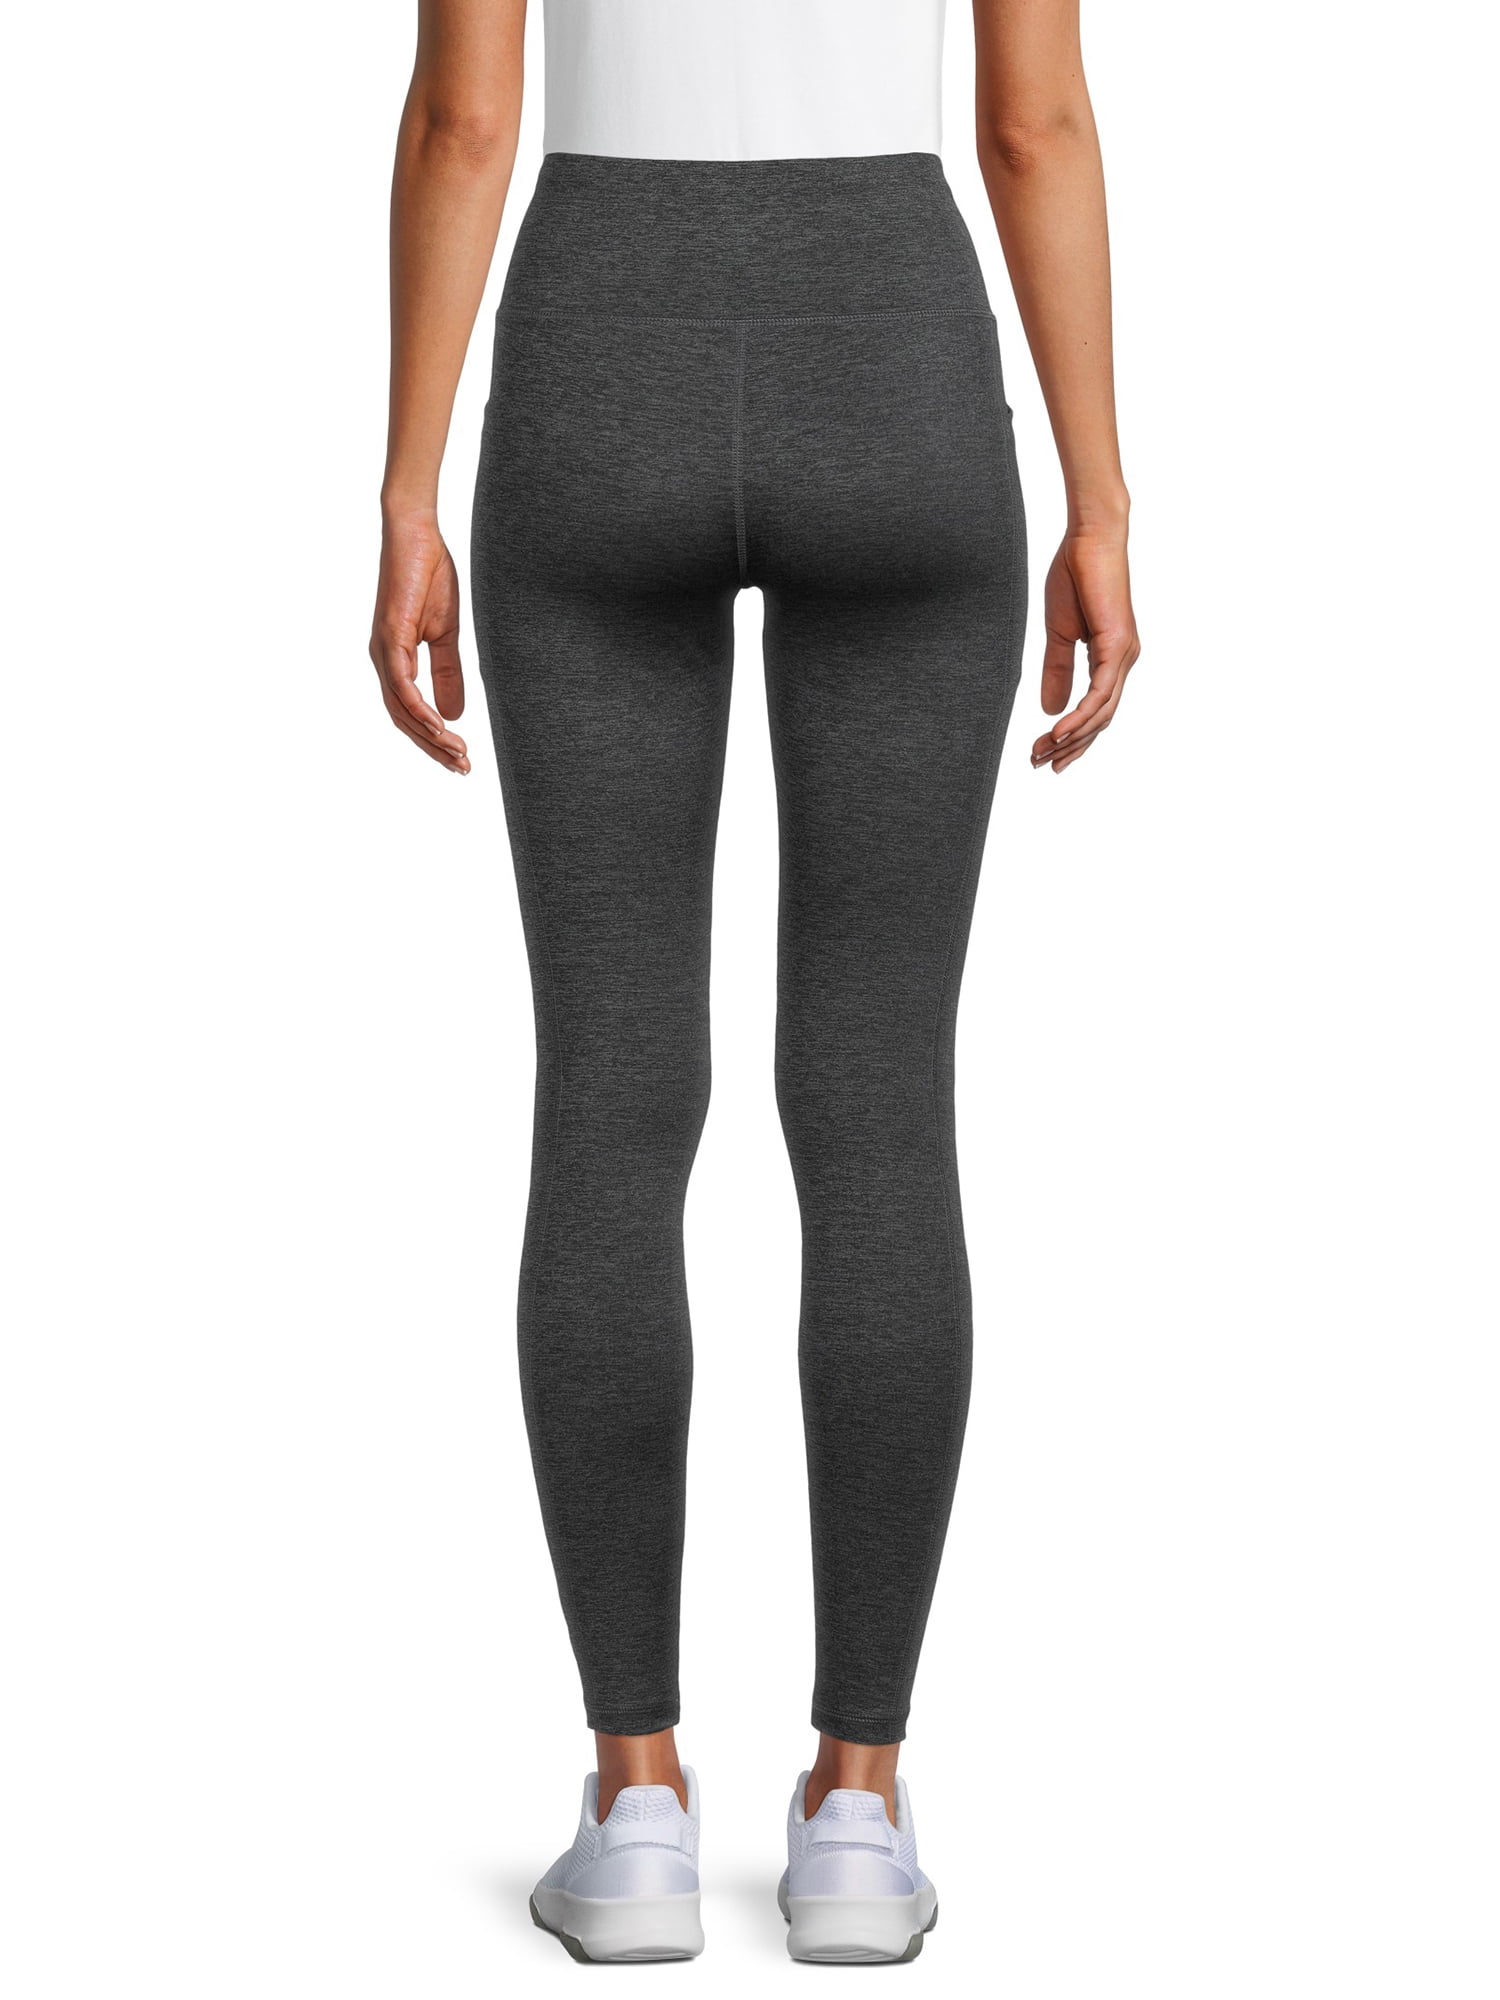 Avia Women's Performance Leggings with Ribbed Insets - Walmart